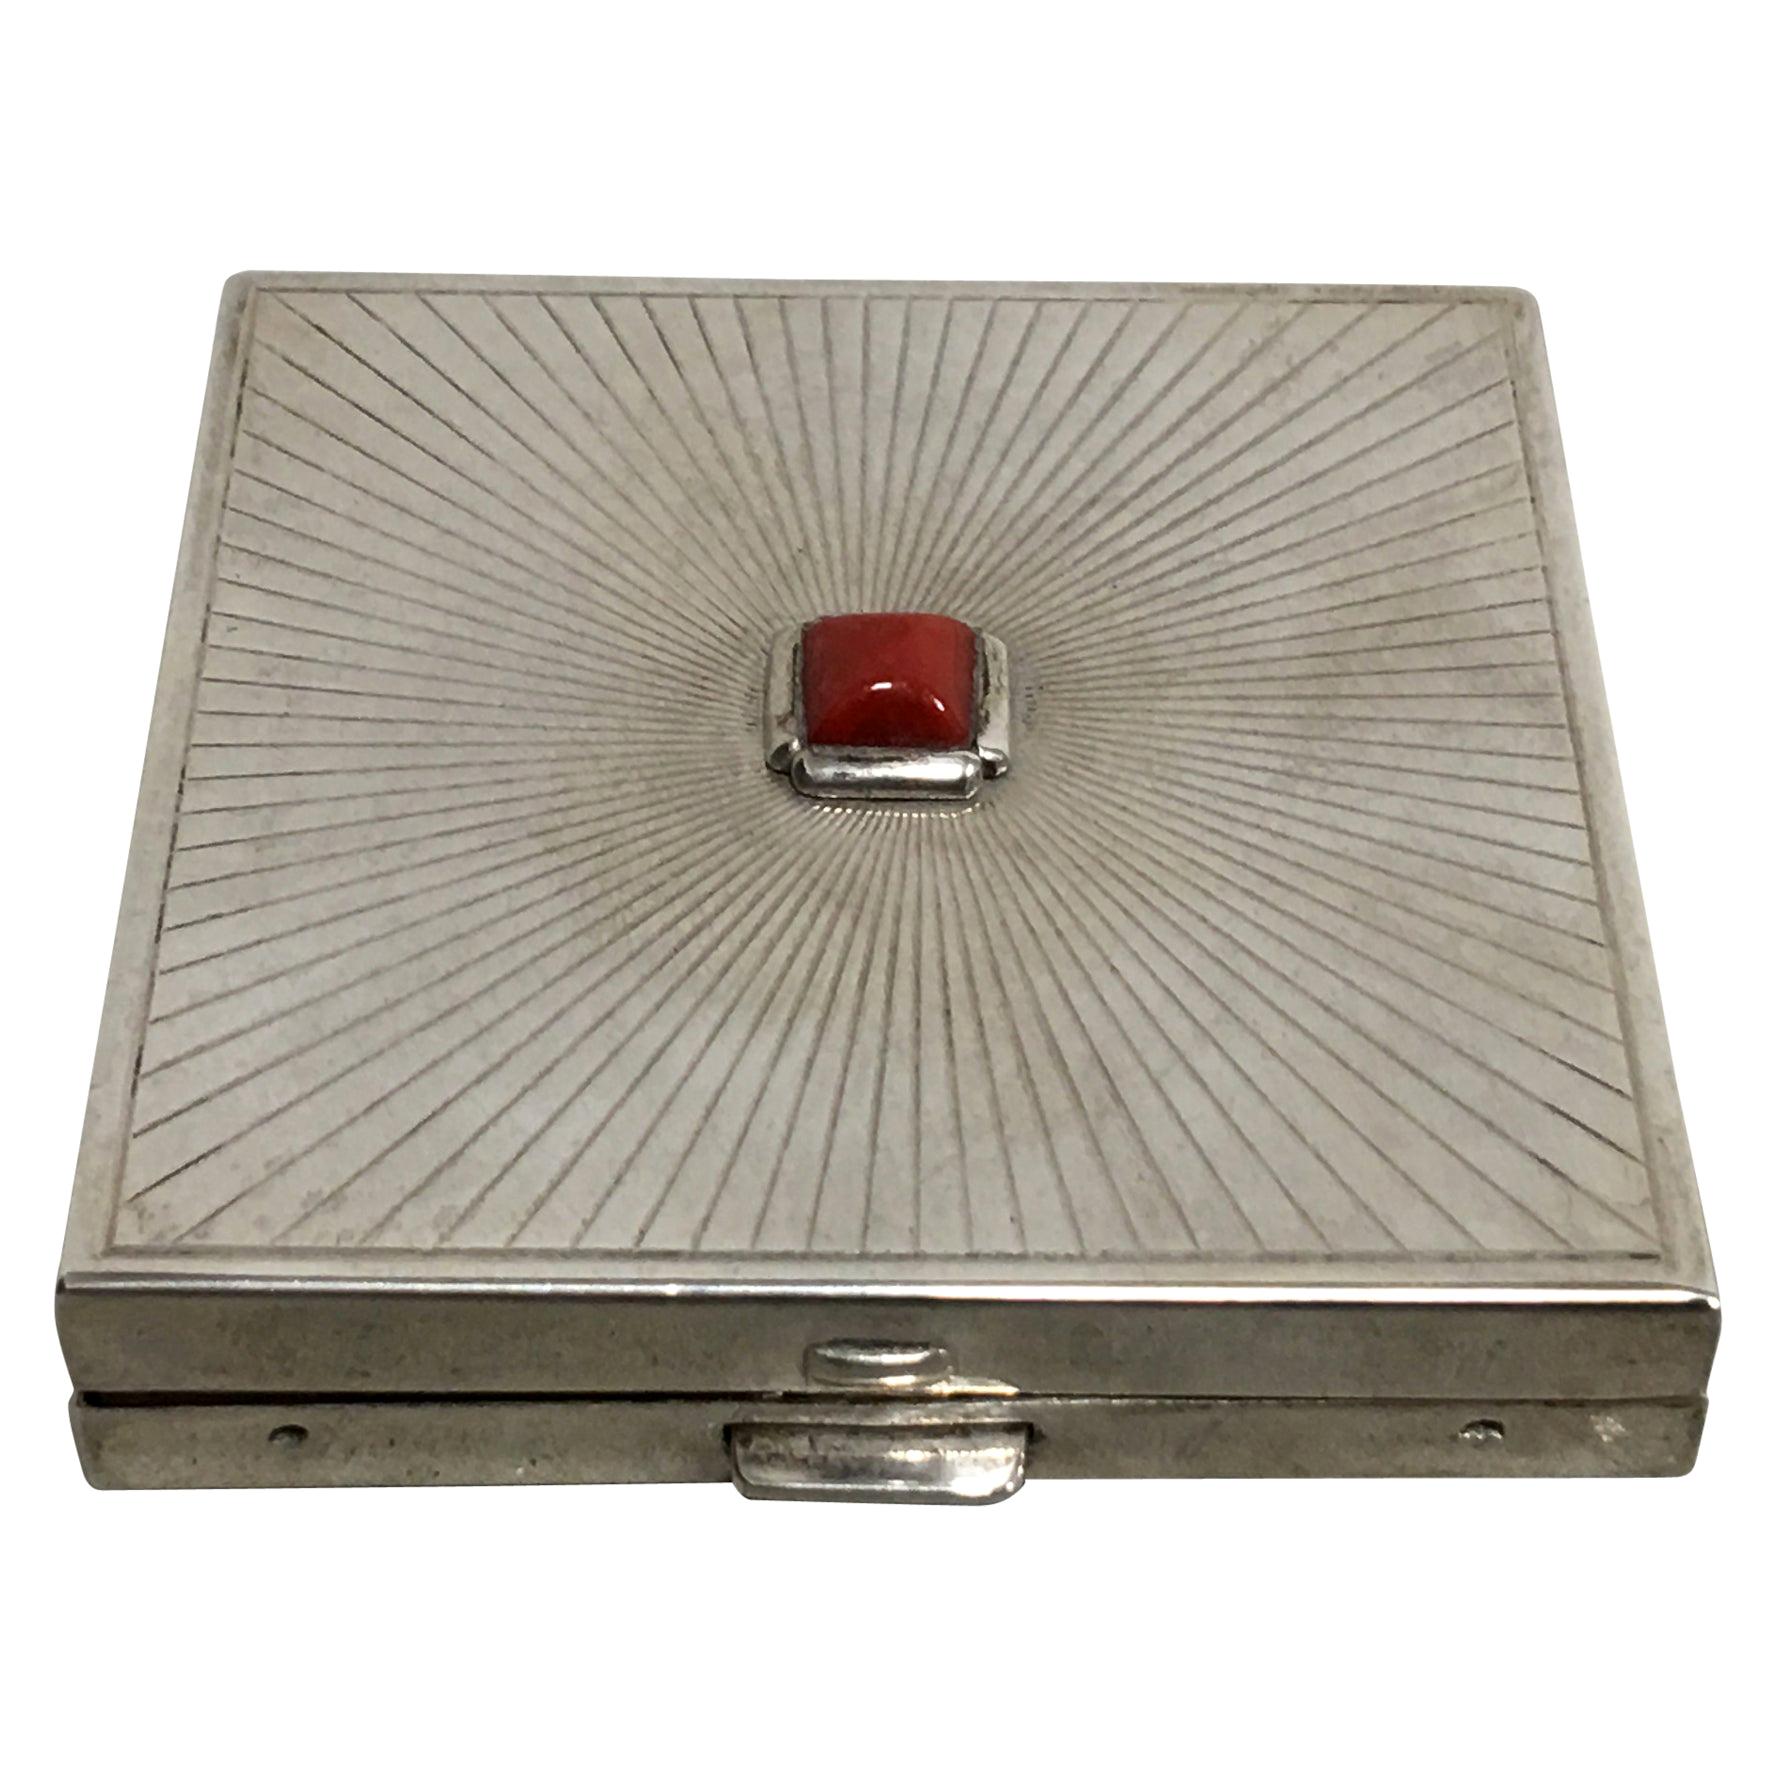 1920s Cartier Sterling Silver Compact with Carnelian Gem Inset